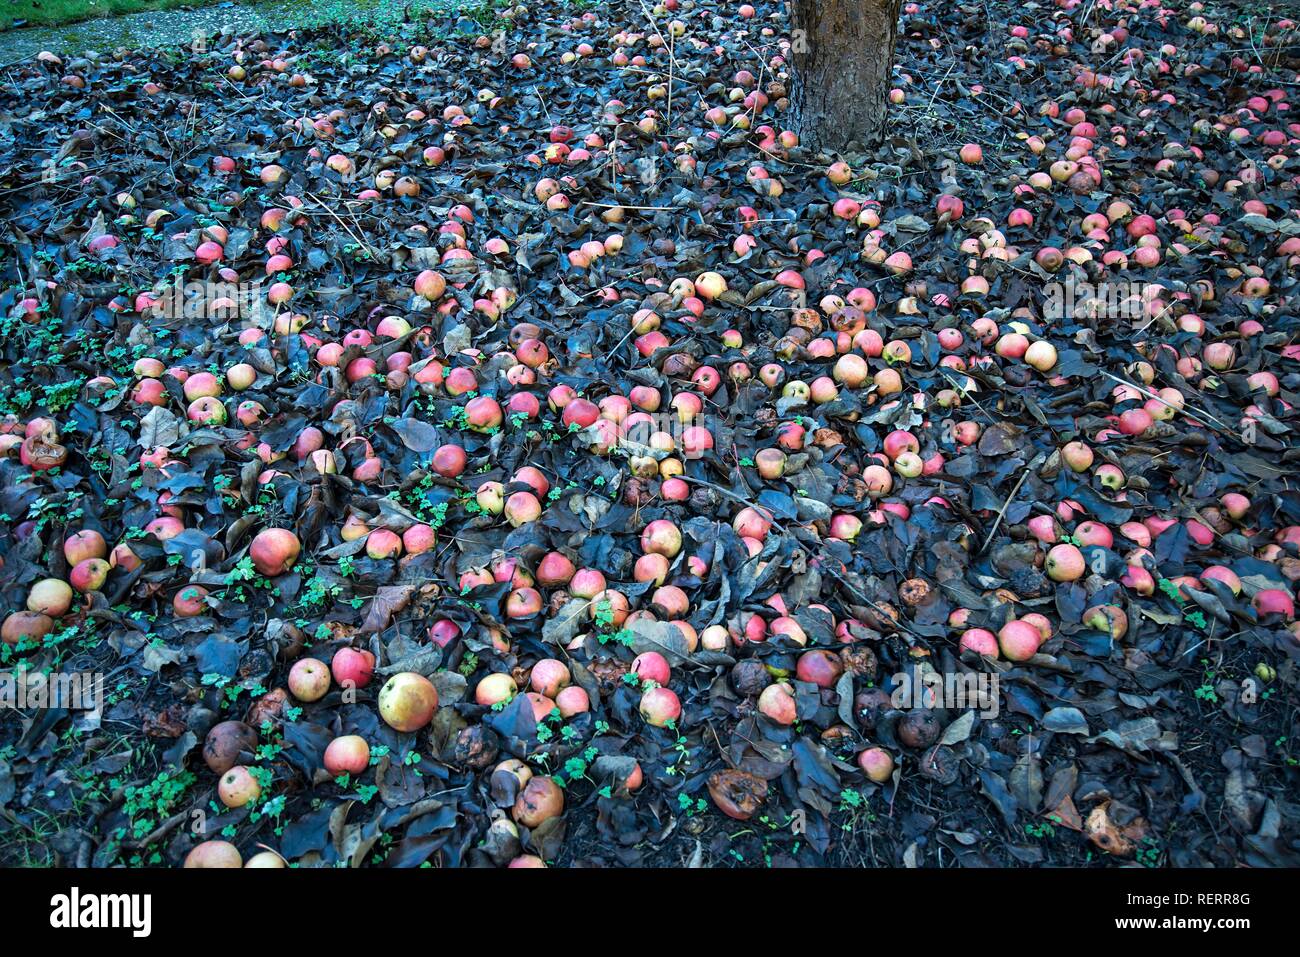 Falling fruit, apples (Malus) in leaves under a Apple tree, Bavaria, Germany Stock Photo